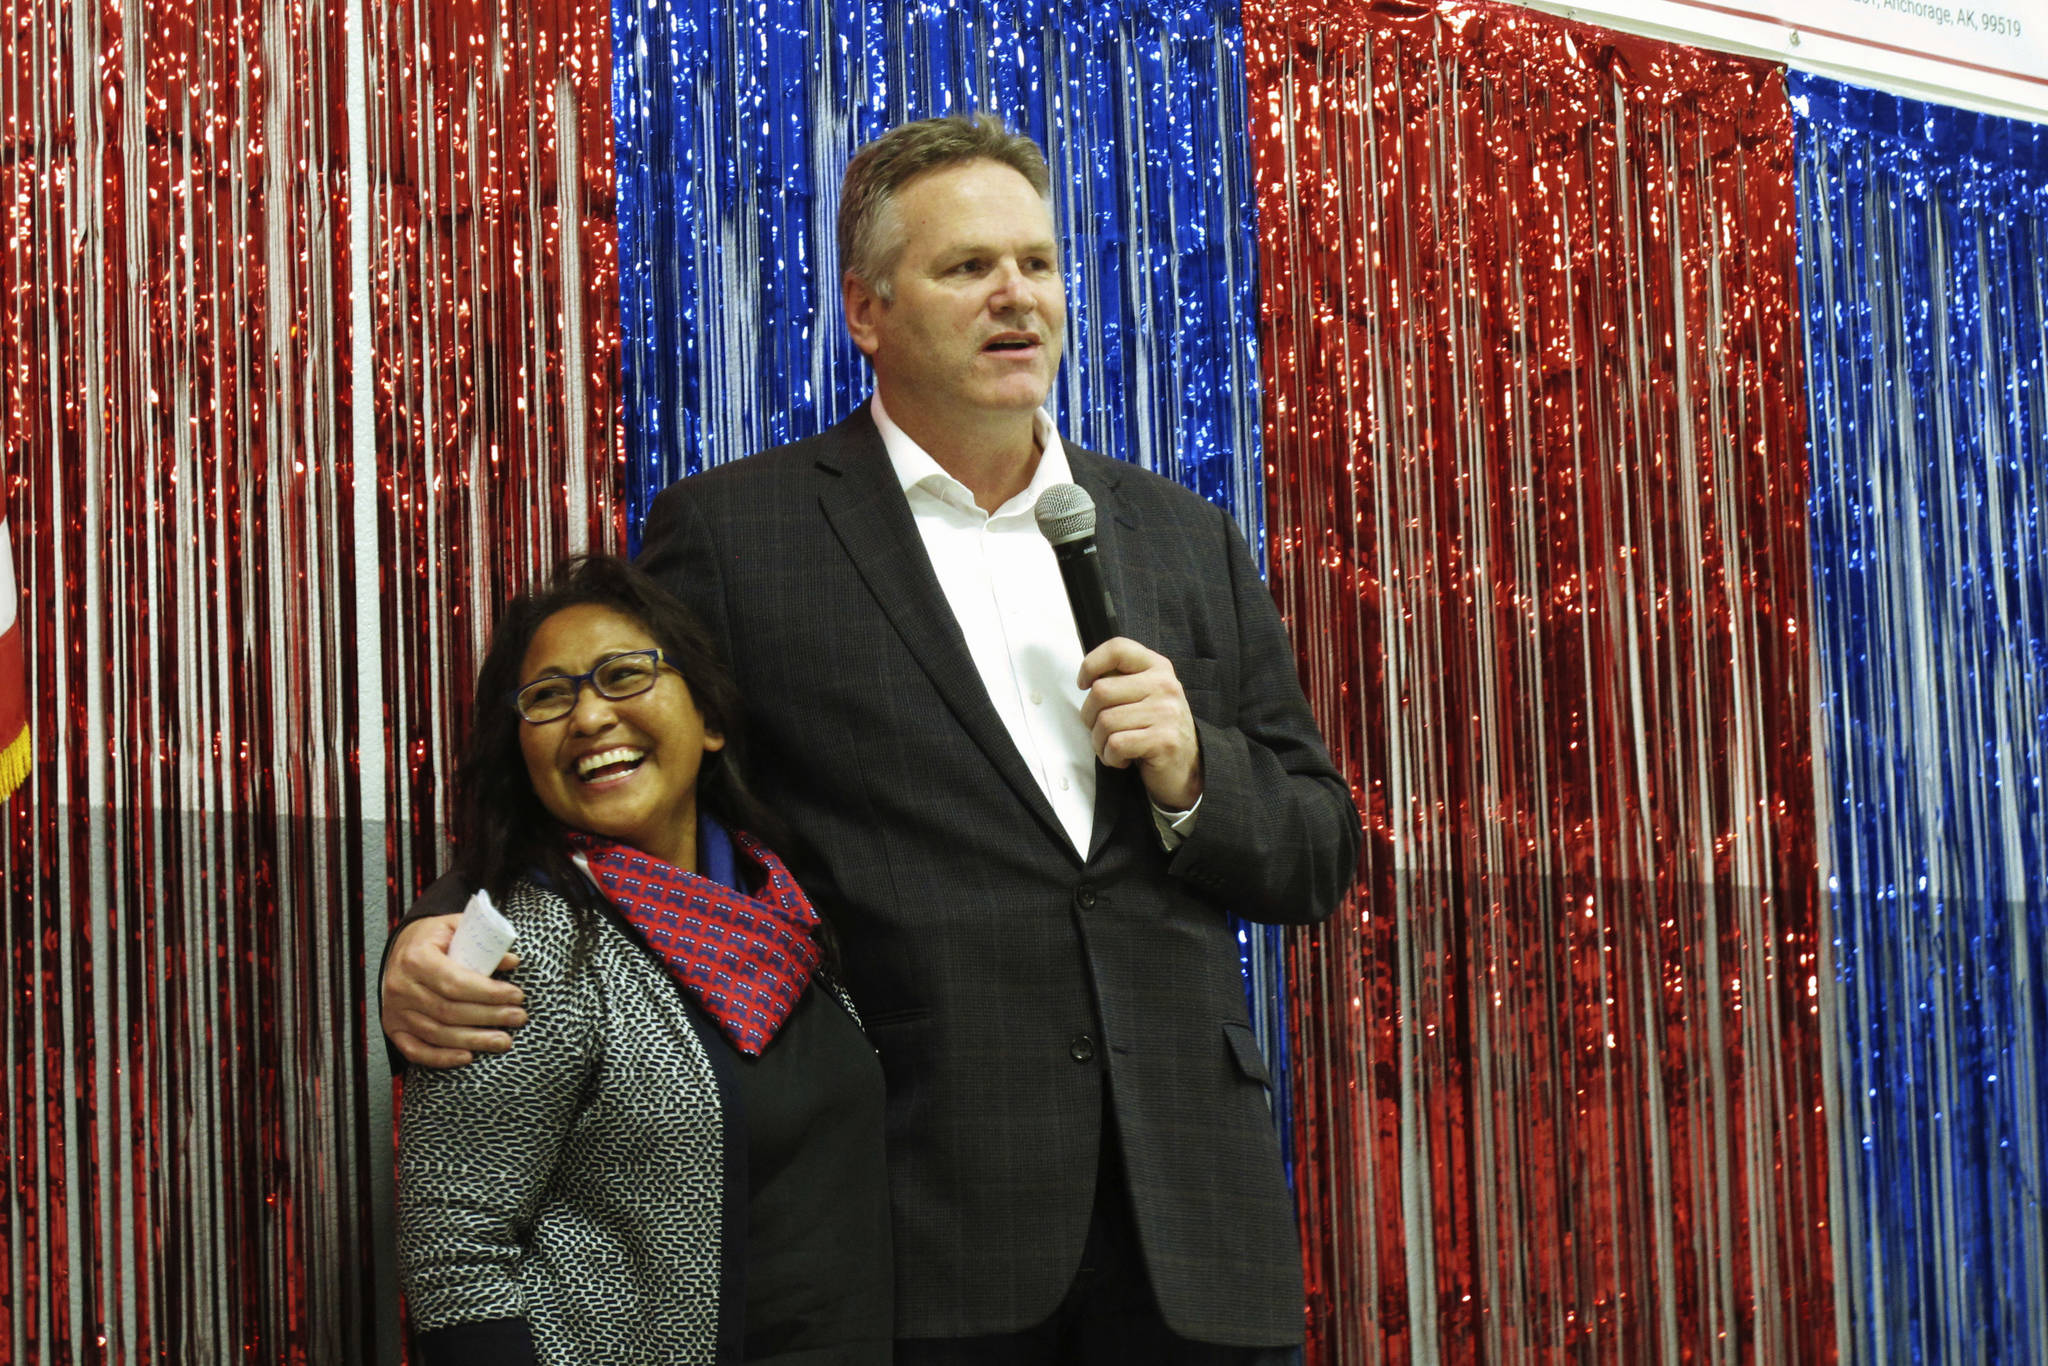 In this Nov. 4, 2018 file photo, Alaska Republican gubernatorial candidate Mike Dunleavy stands with his wife, Rose, on stage during a GOP rally in Anchorage, Alaska. Alaska Gov.-elect Mike Dunleavy takes office Monday, Dec. 3, days after a magnitude 7.0 earthquake rocked heavily-populated south-central Alaska. (AP Photo/Becky Bohrer, File)